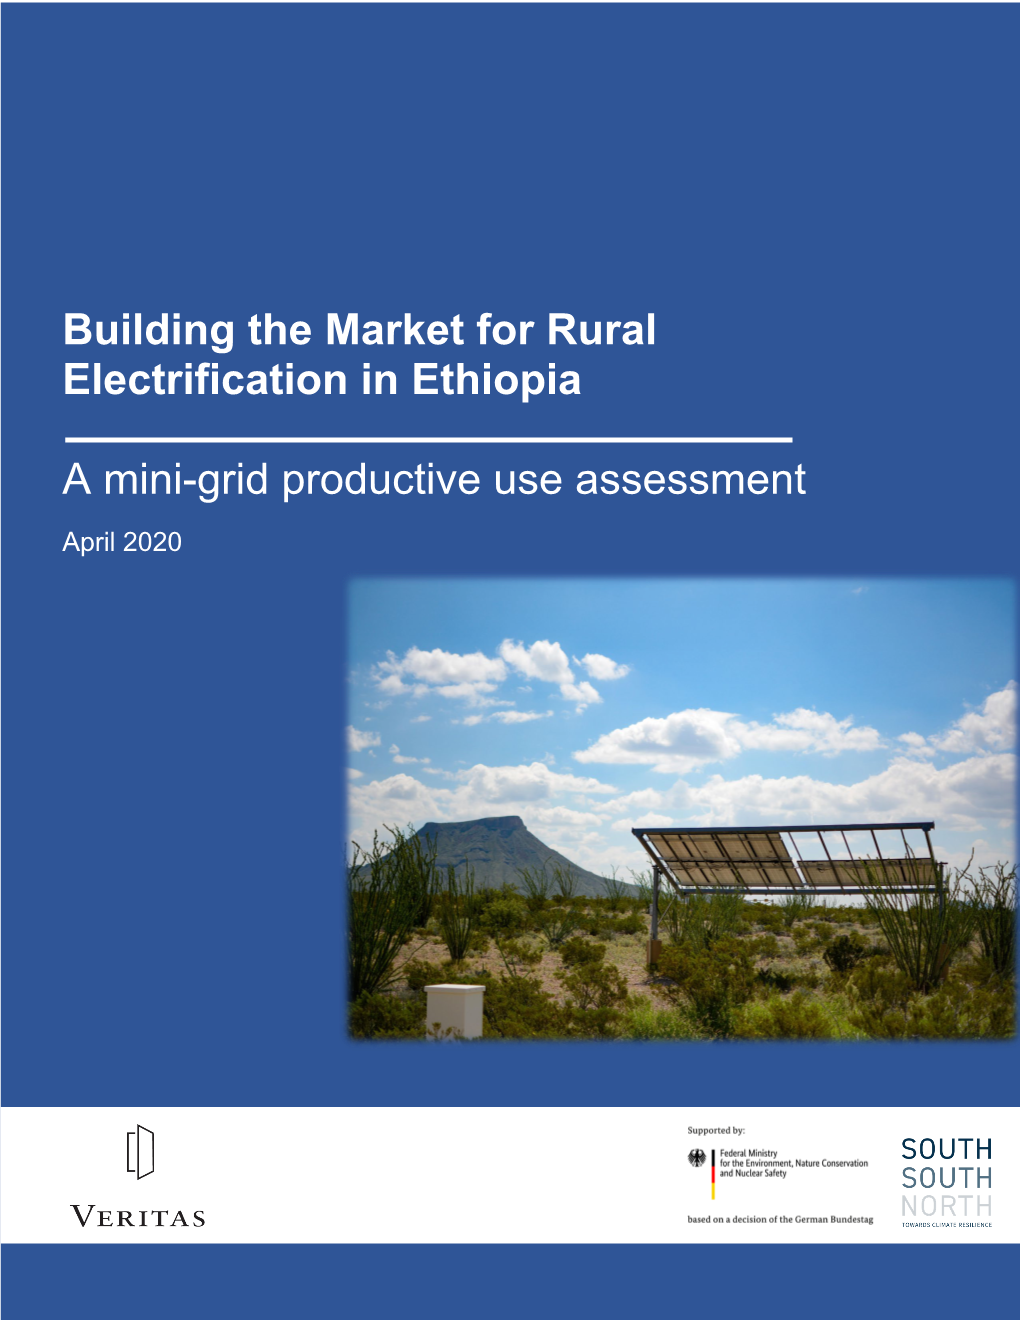 Building the Market for Rural Electrification in Ethiopia a Mini-Grid Productive Use Assessment